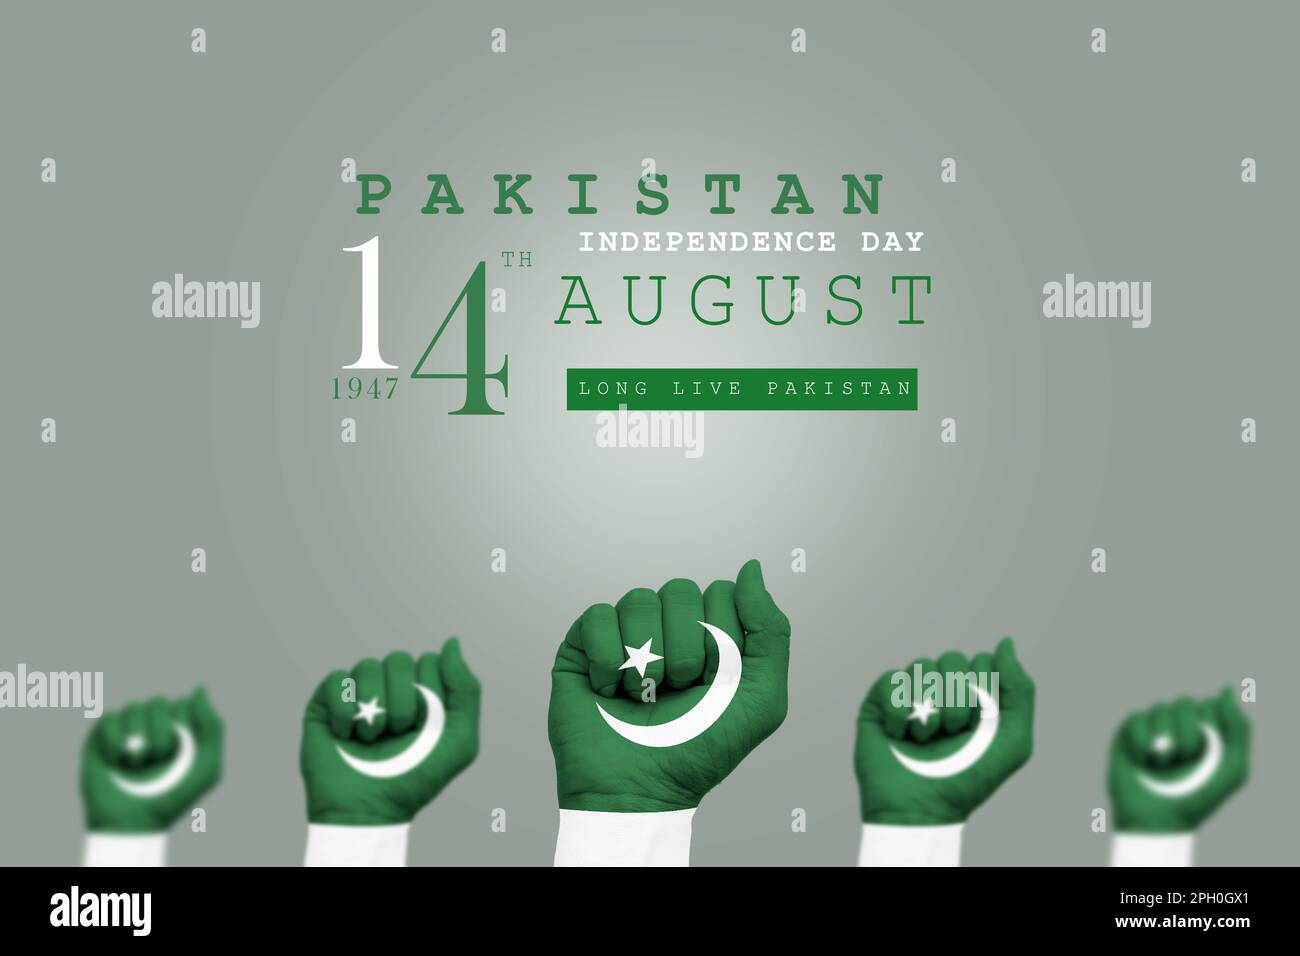 Pakistan Independence day 14th August 1947 poster with hands painted with Pakistani flag and grey background, Long live Pakistan Stock Photo